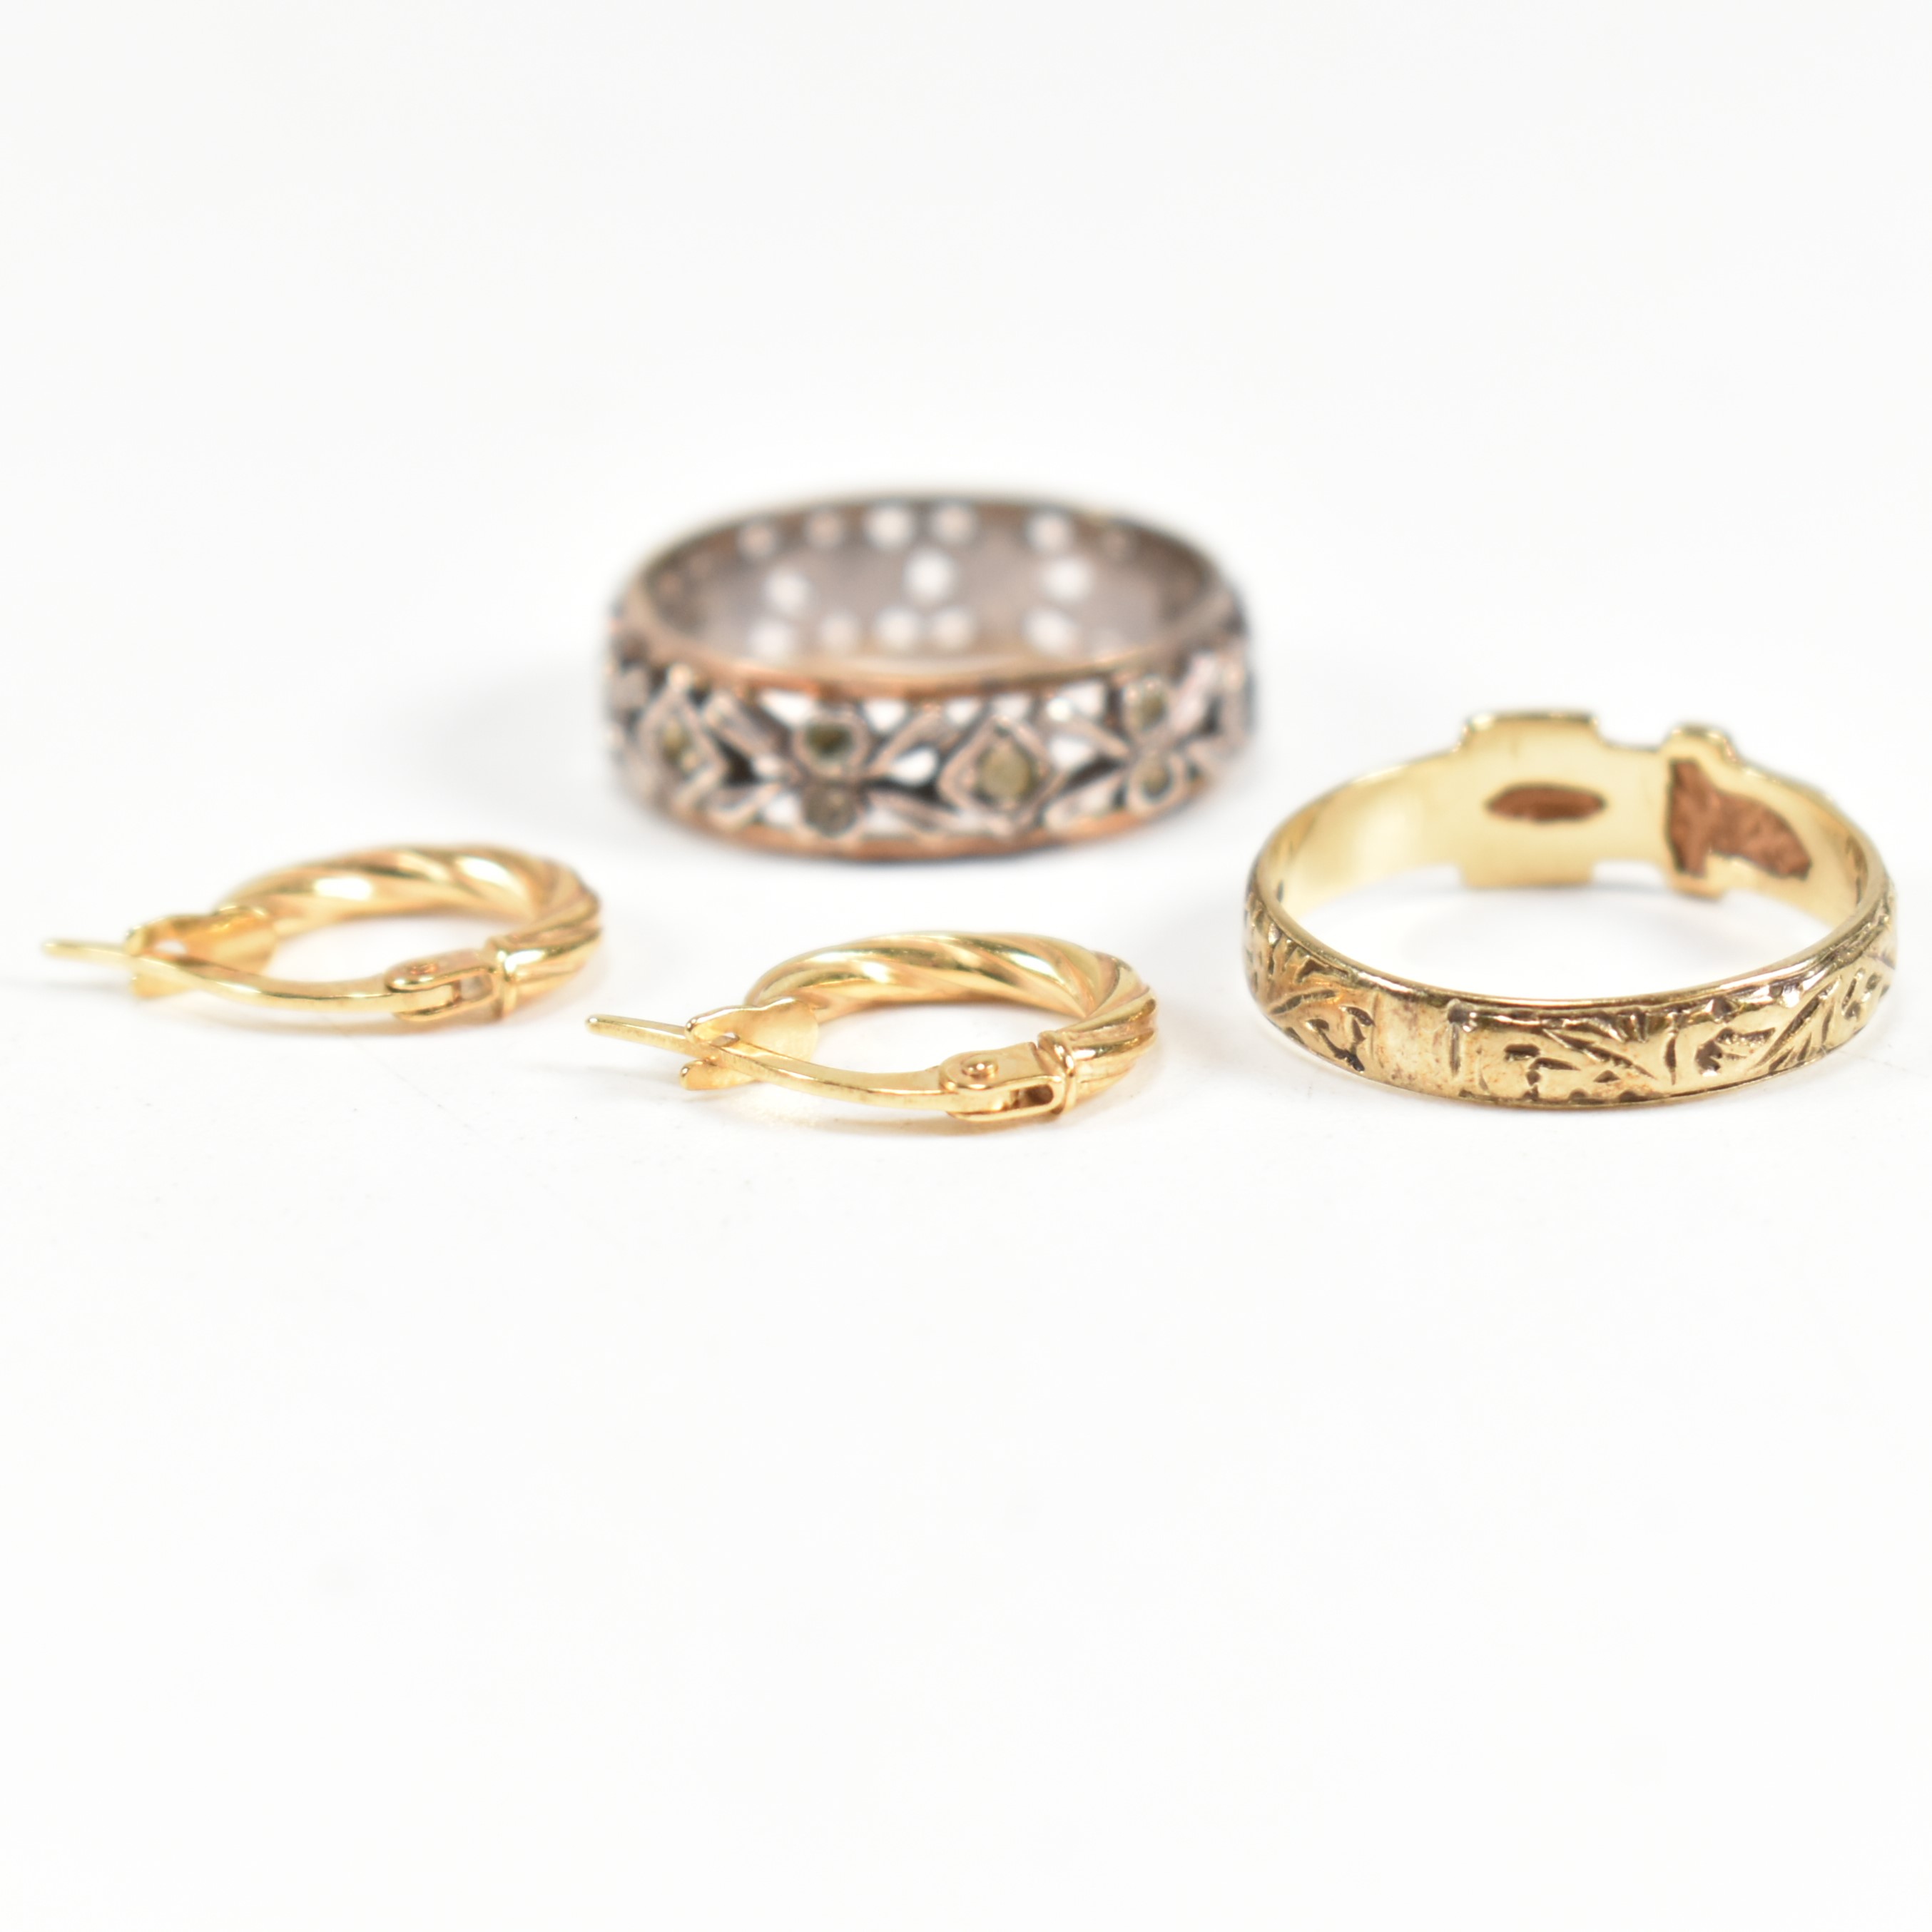 COLLECTION OF 9CT GOLD JEWELLERY INCLUDING GOLD & SILVER ETERNITY RING - Image 7 of 13